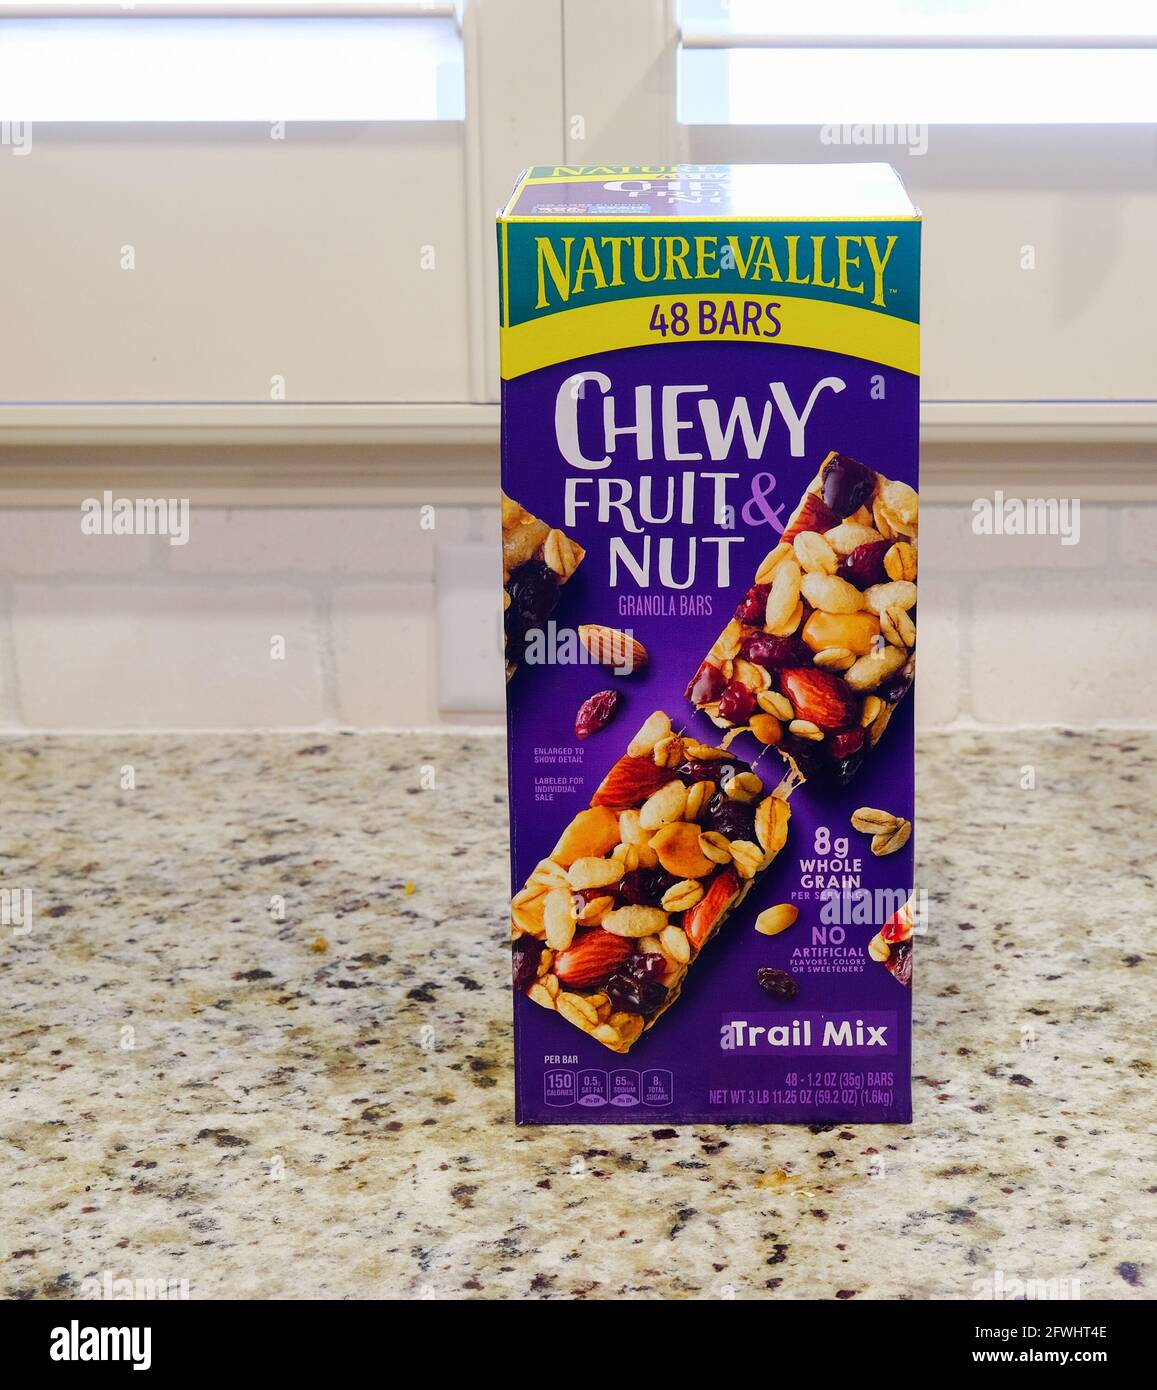 Natural Valley Chewy granola bar Foto Stock